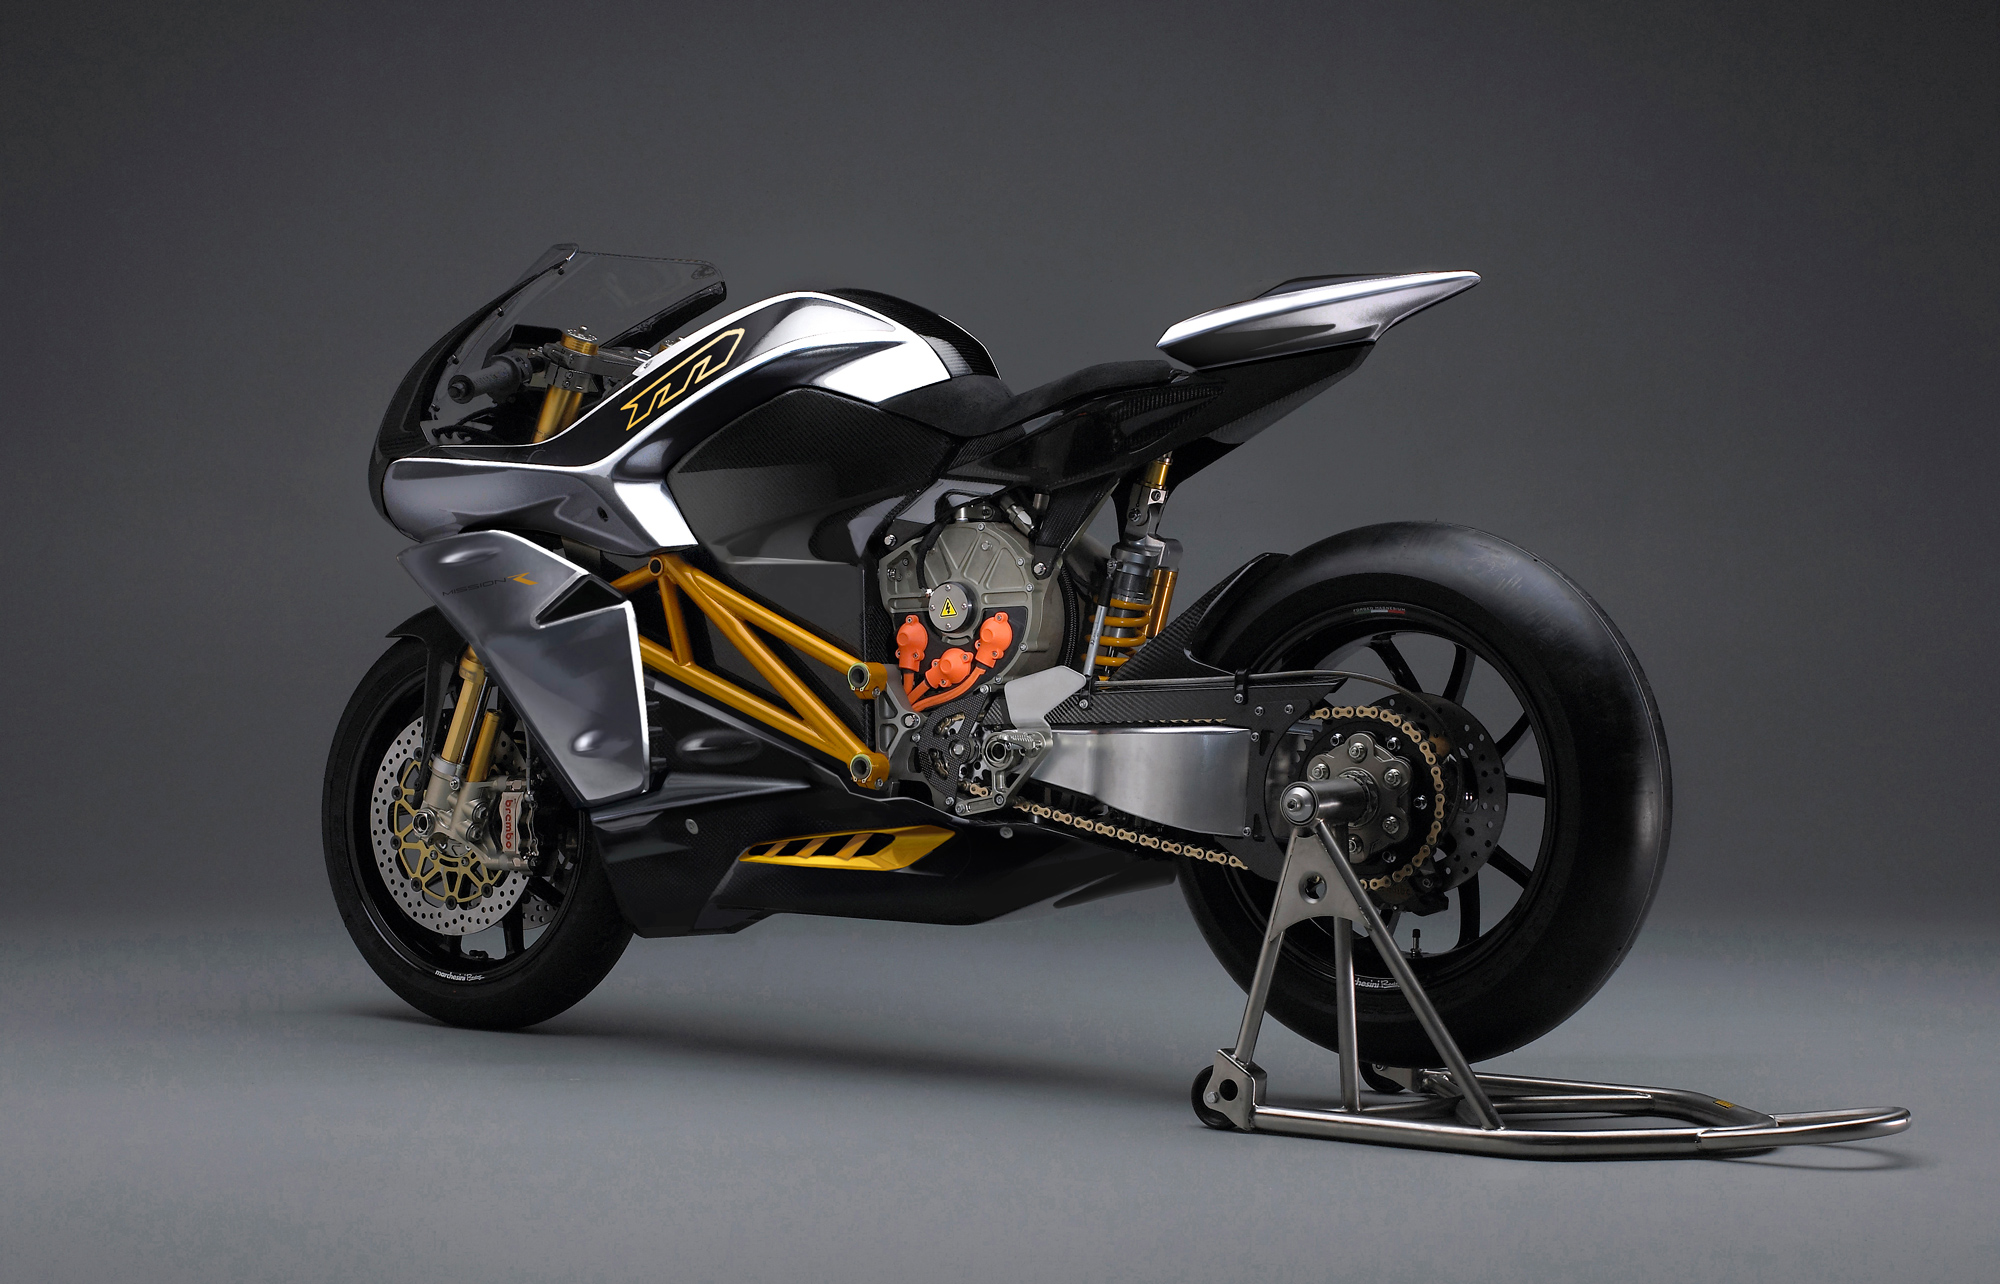 Mission RS, the world’s fastest electric bike, touches 60mph in 3